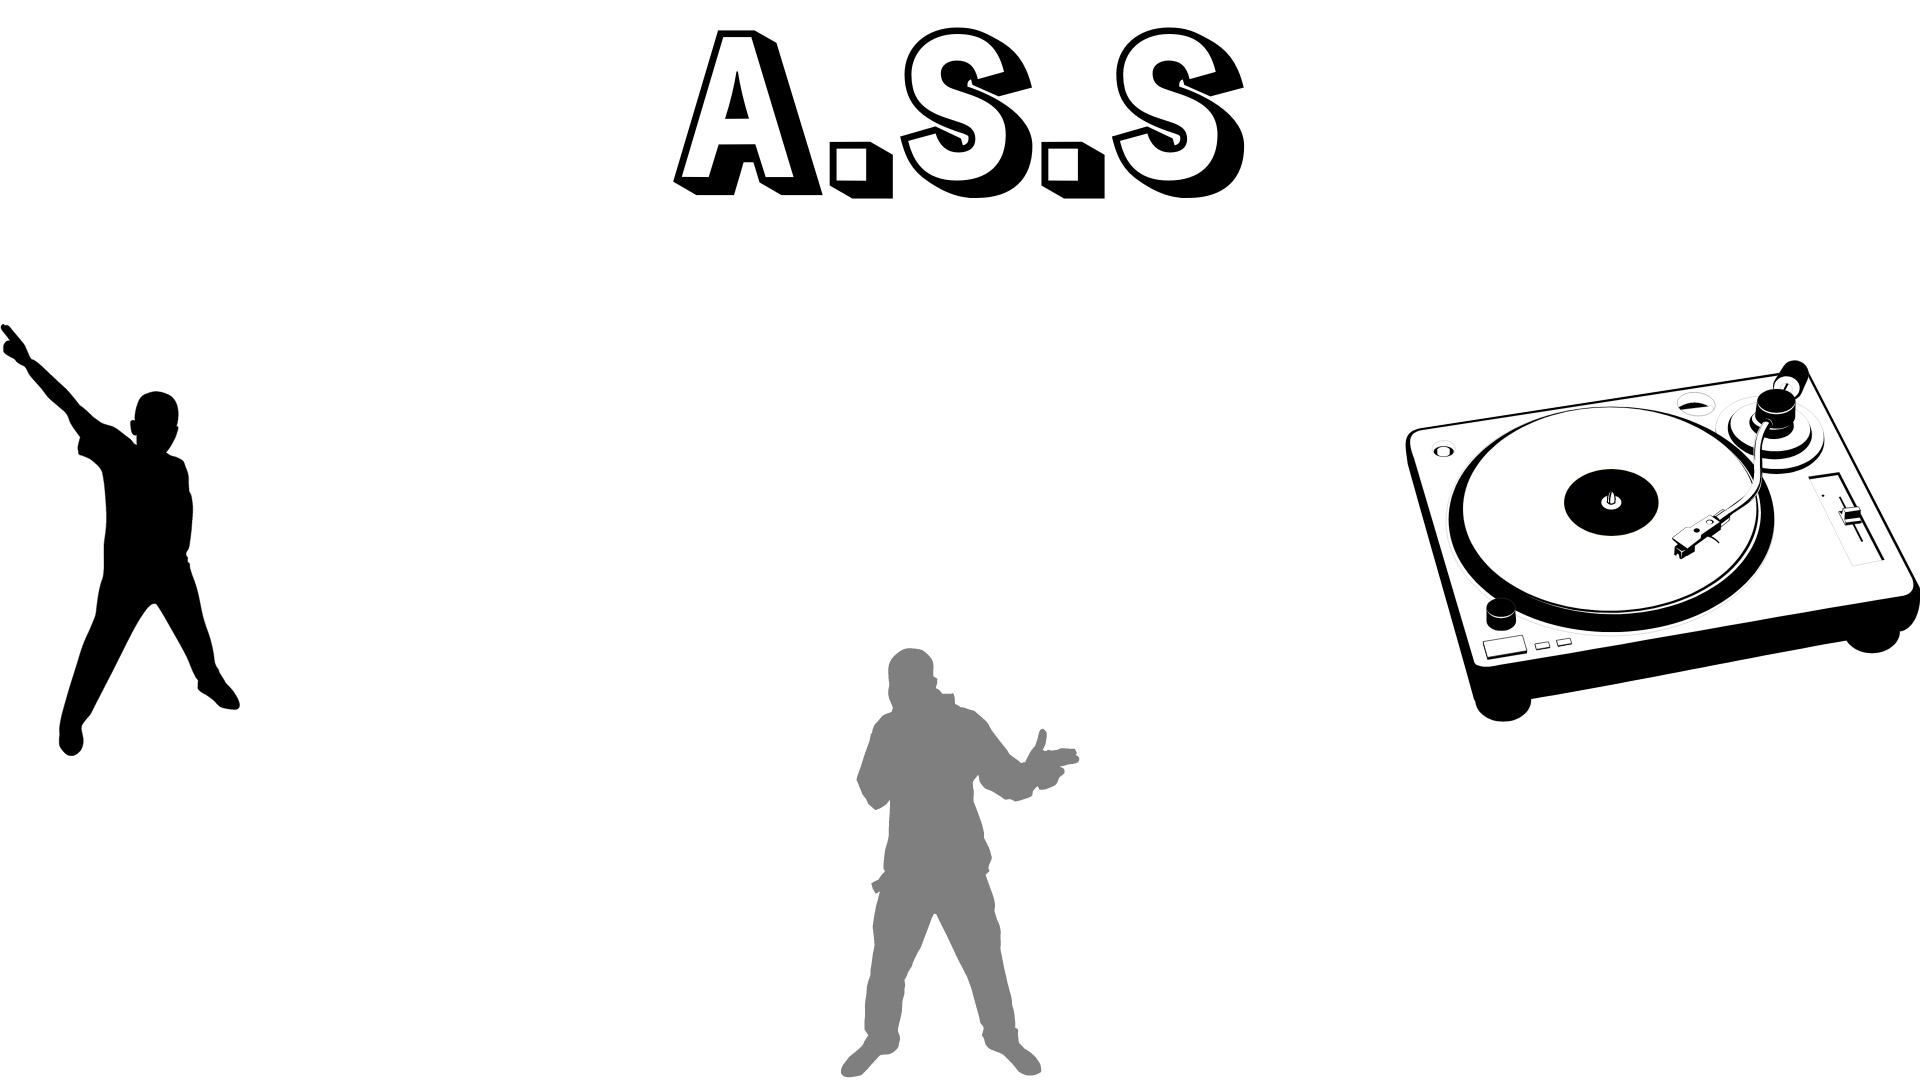 A.S.S